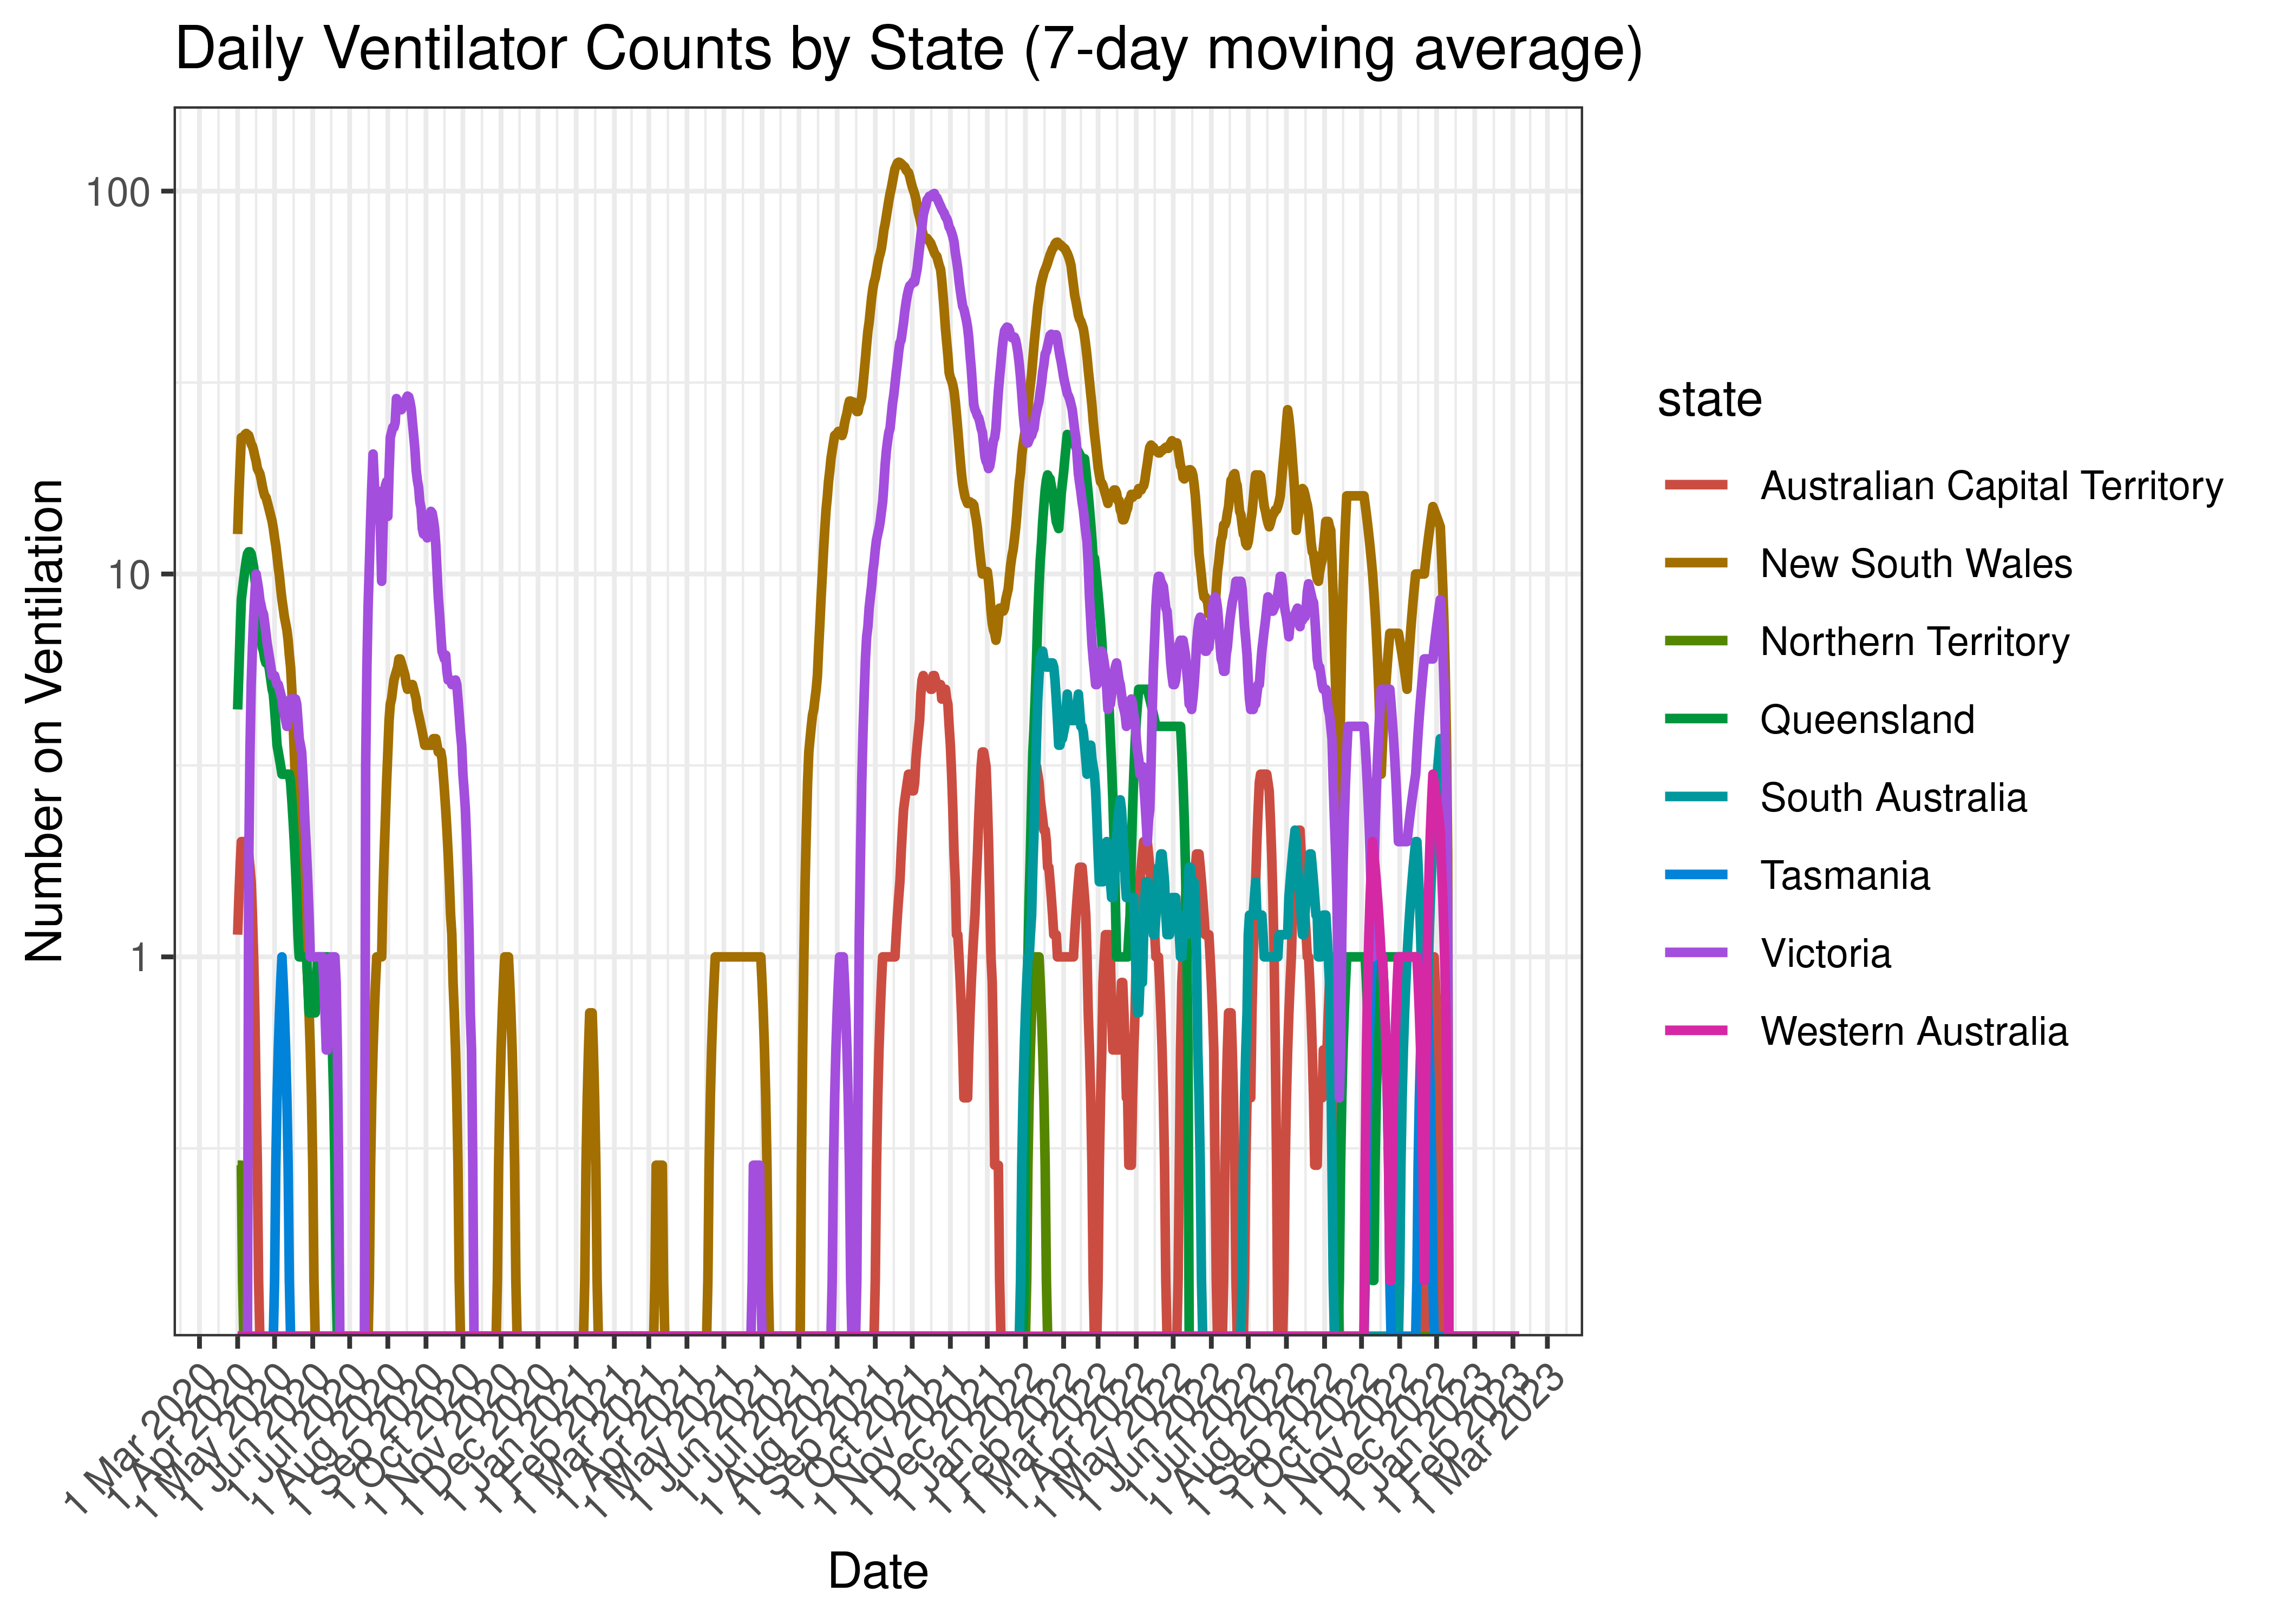 Daily Ventilator Counts by State (7-day moving average)